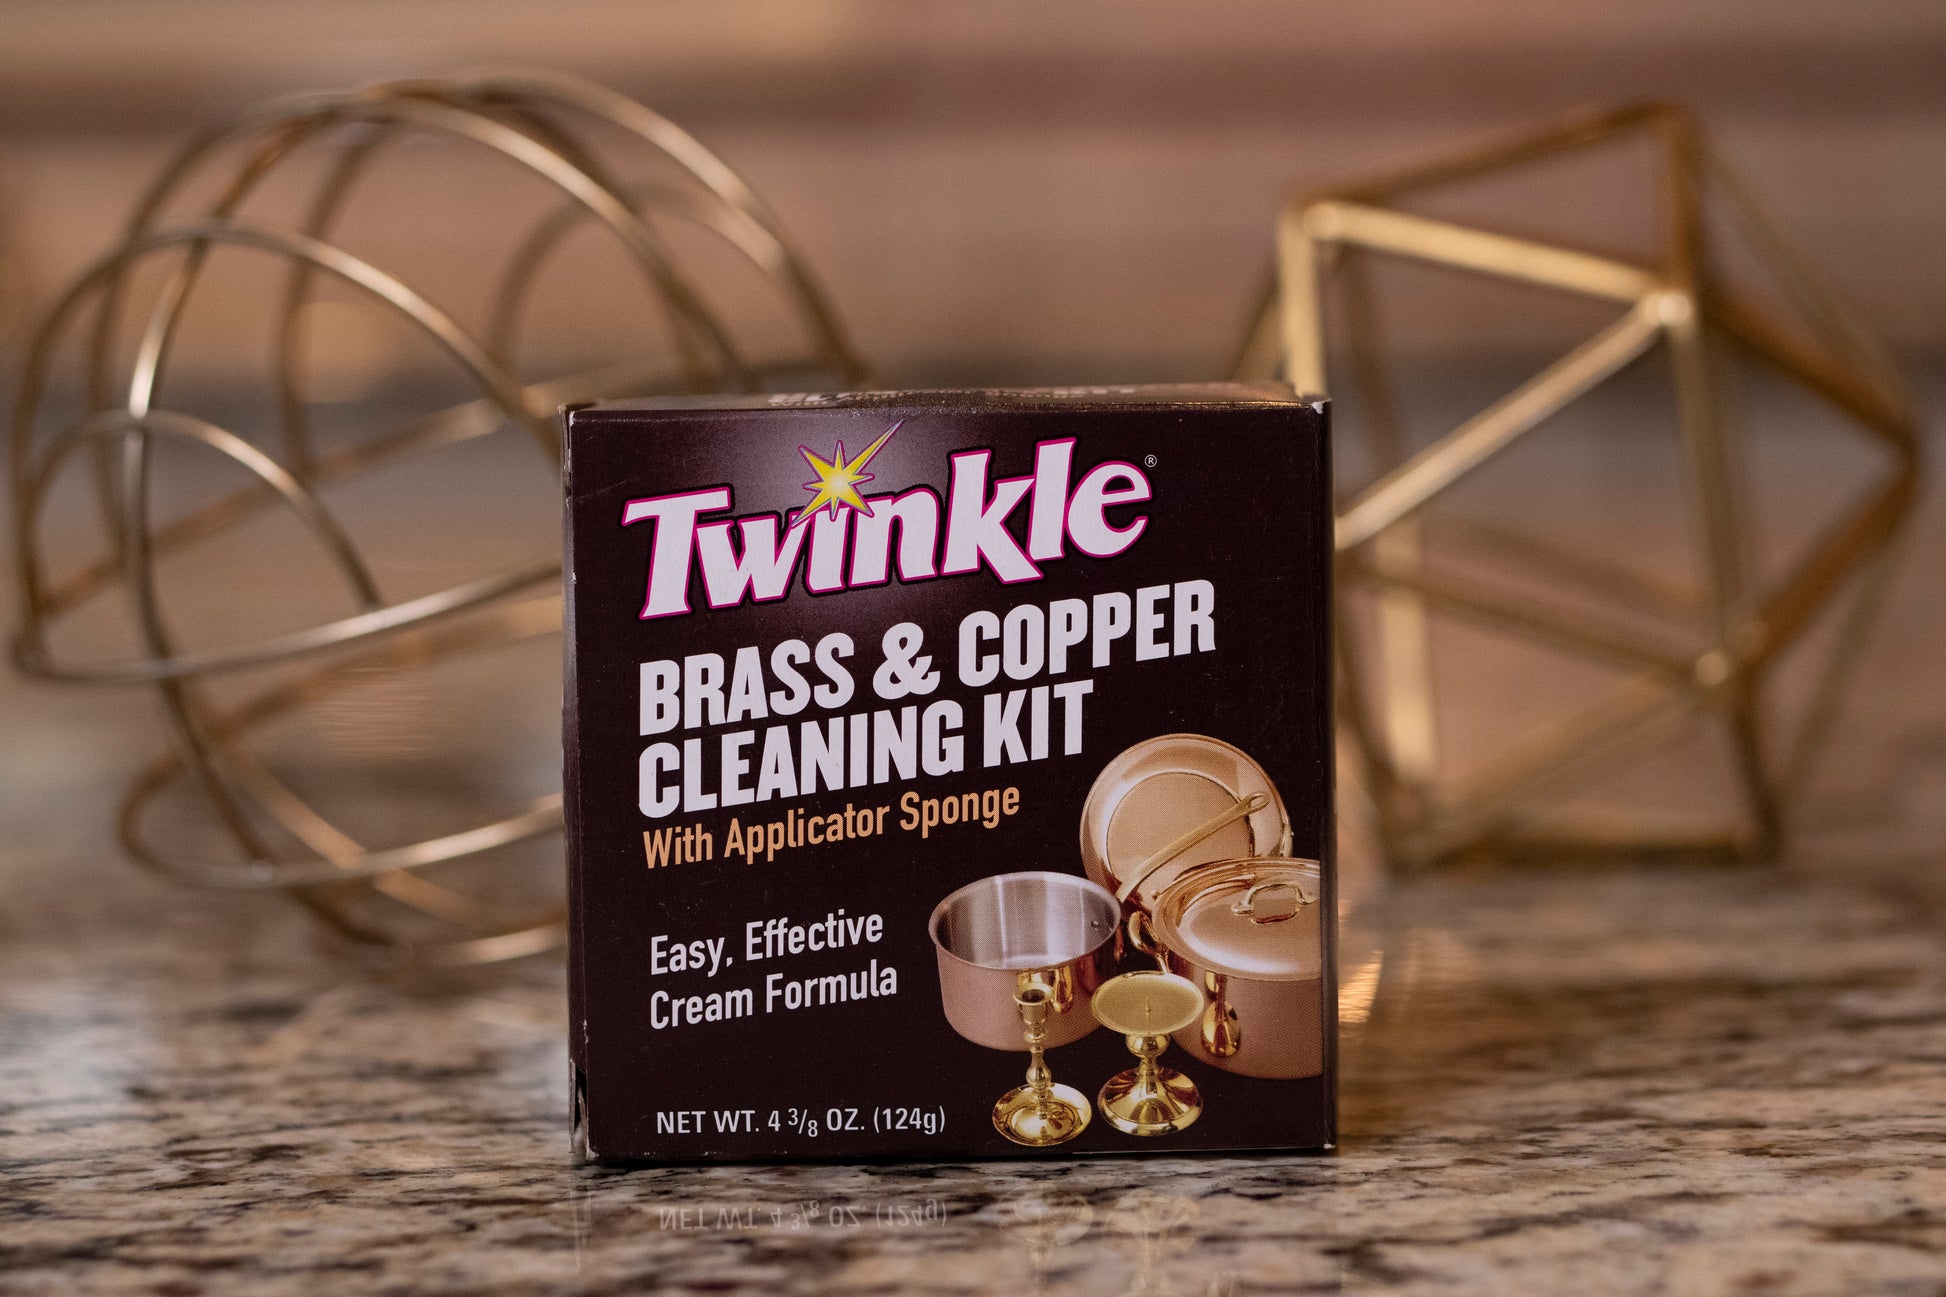 Twinkle 525105 Brass and Copper Cleaning Kit, 4.4 oz, Pas